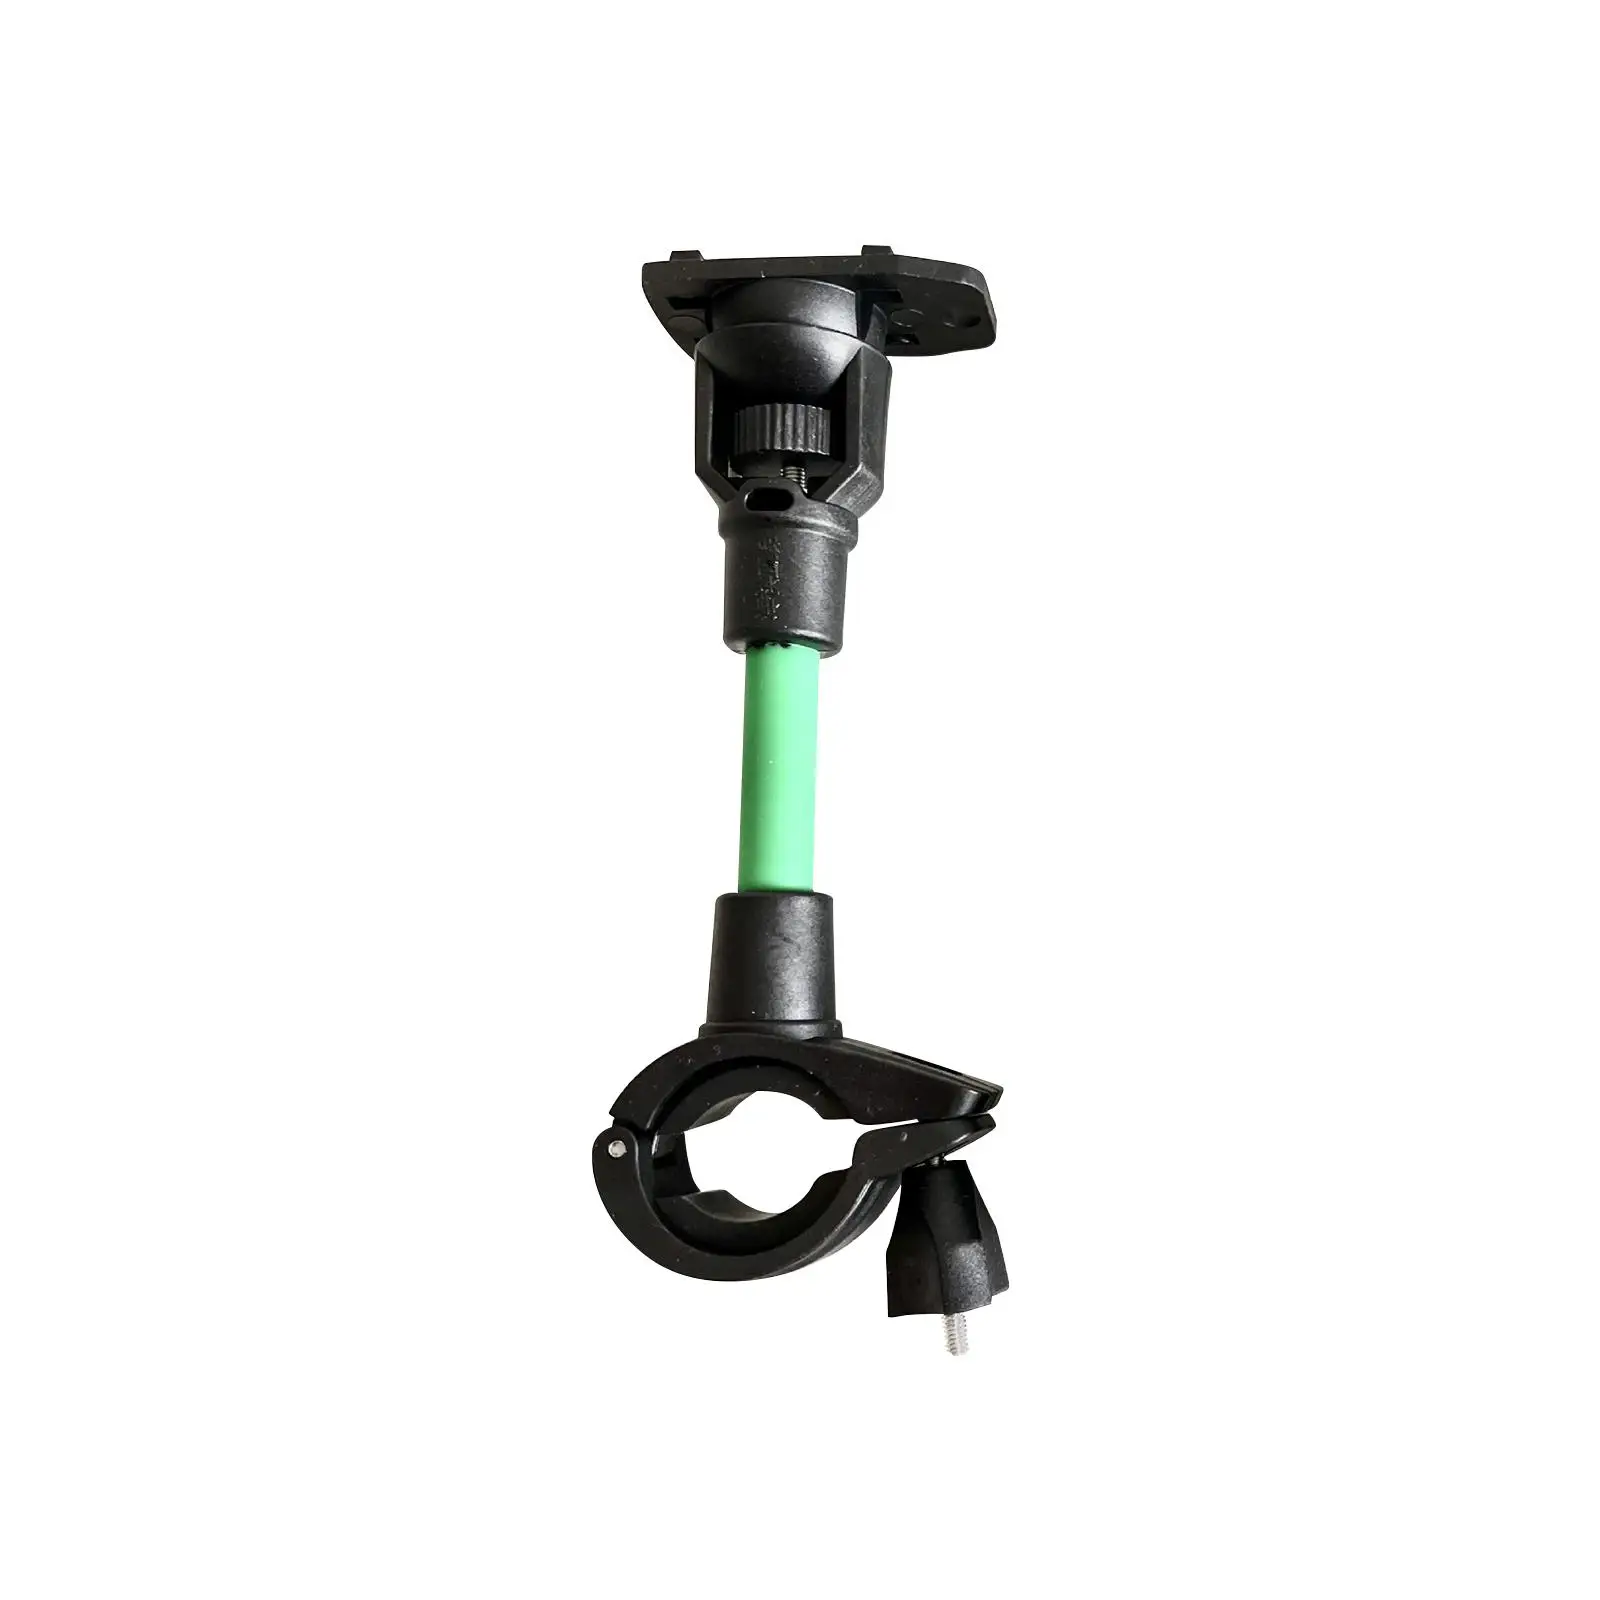 Fish Finders Clamp Mount for Fishing Pole Fishing Camera Holder for Outdoor Fishing Sea Fishing